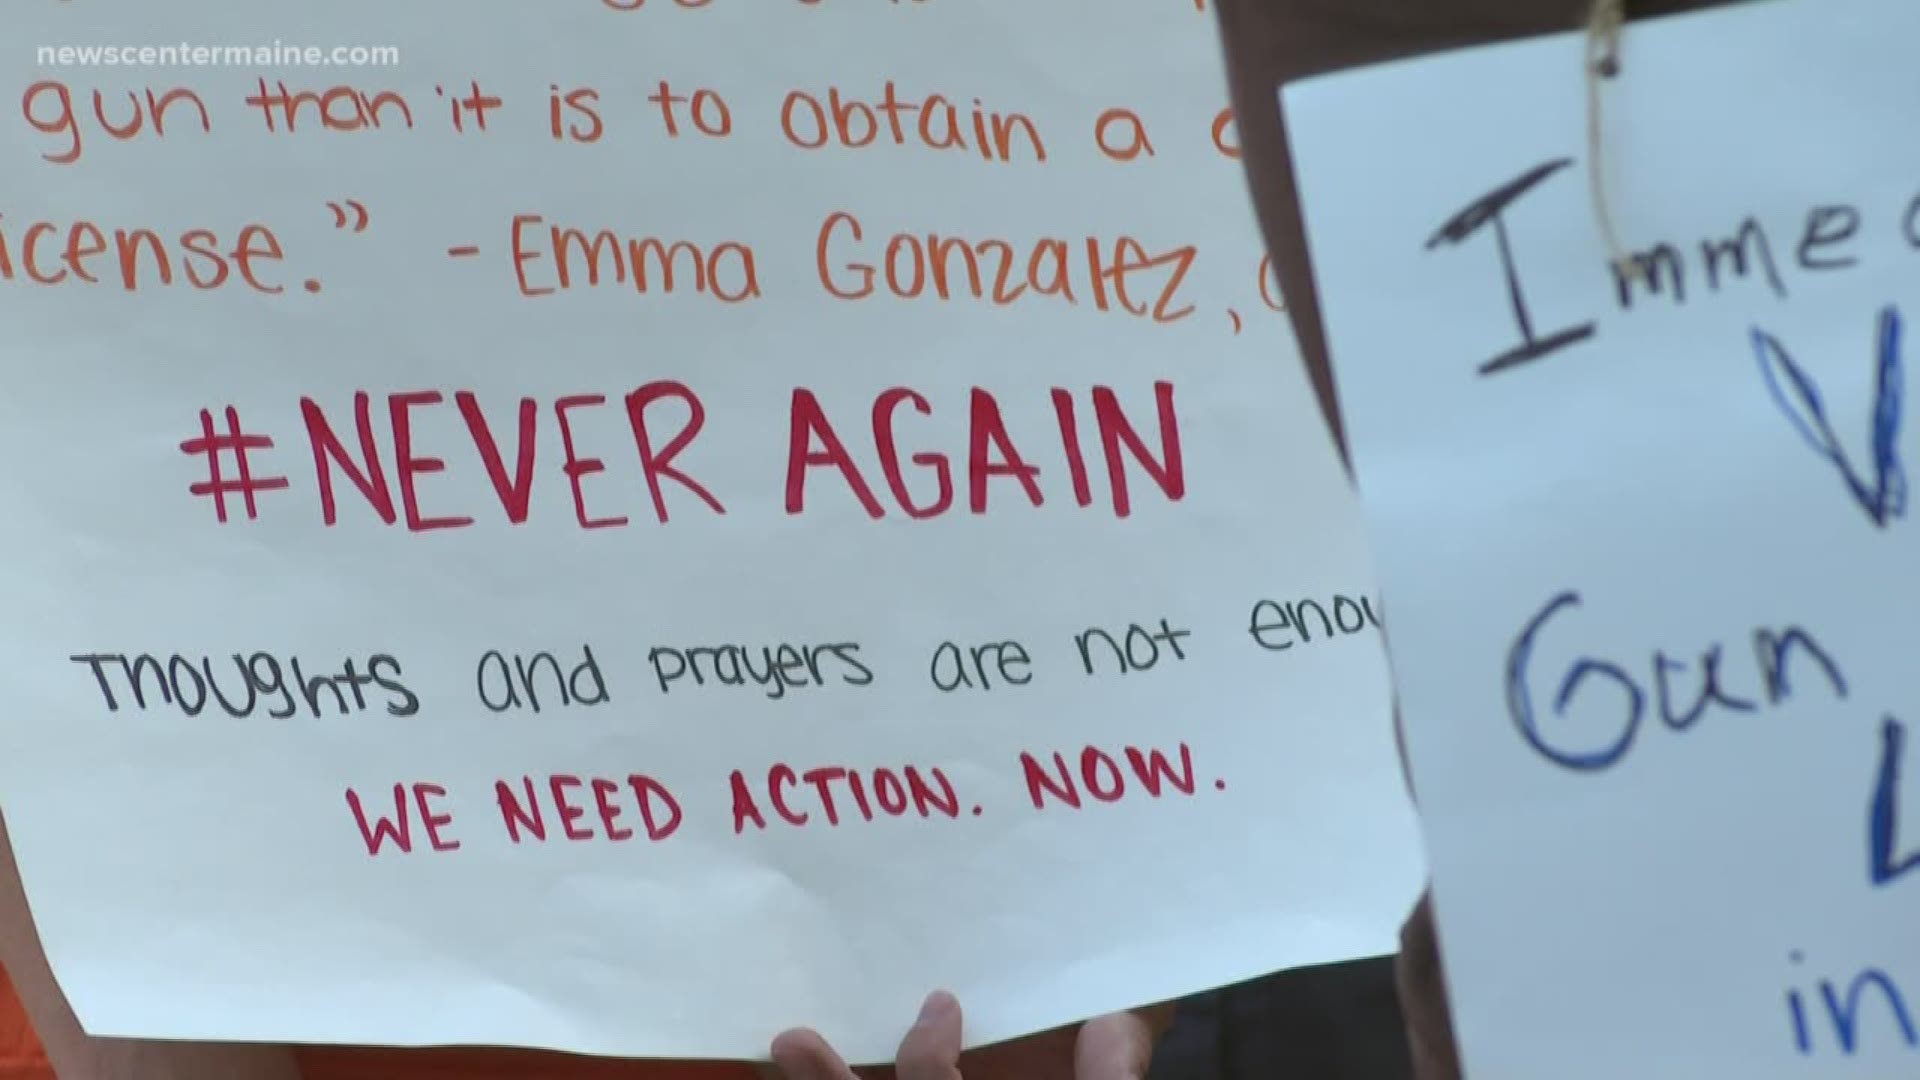 Dozens of people gathered at Portland's City Hall Thursday to protest after lass weekend's mass shootings in El Paso and Dayton.